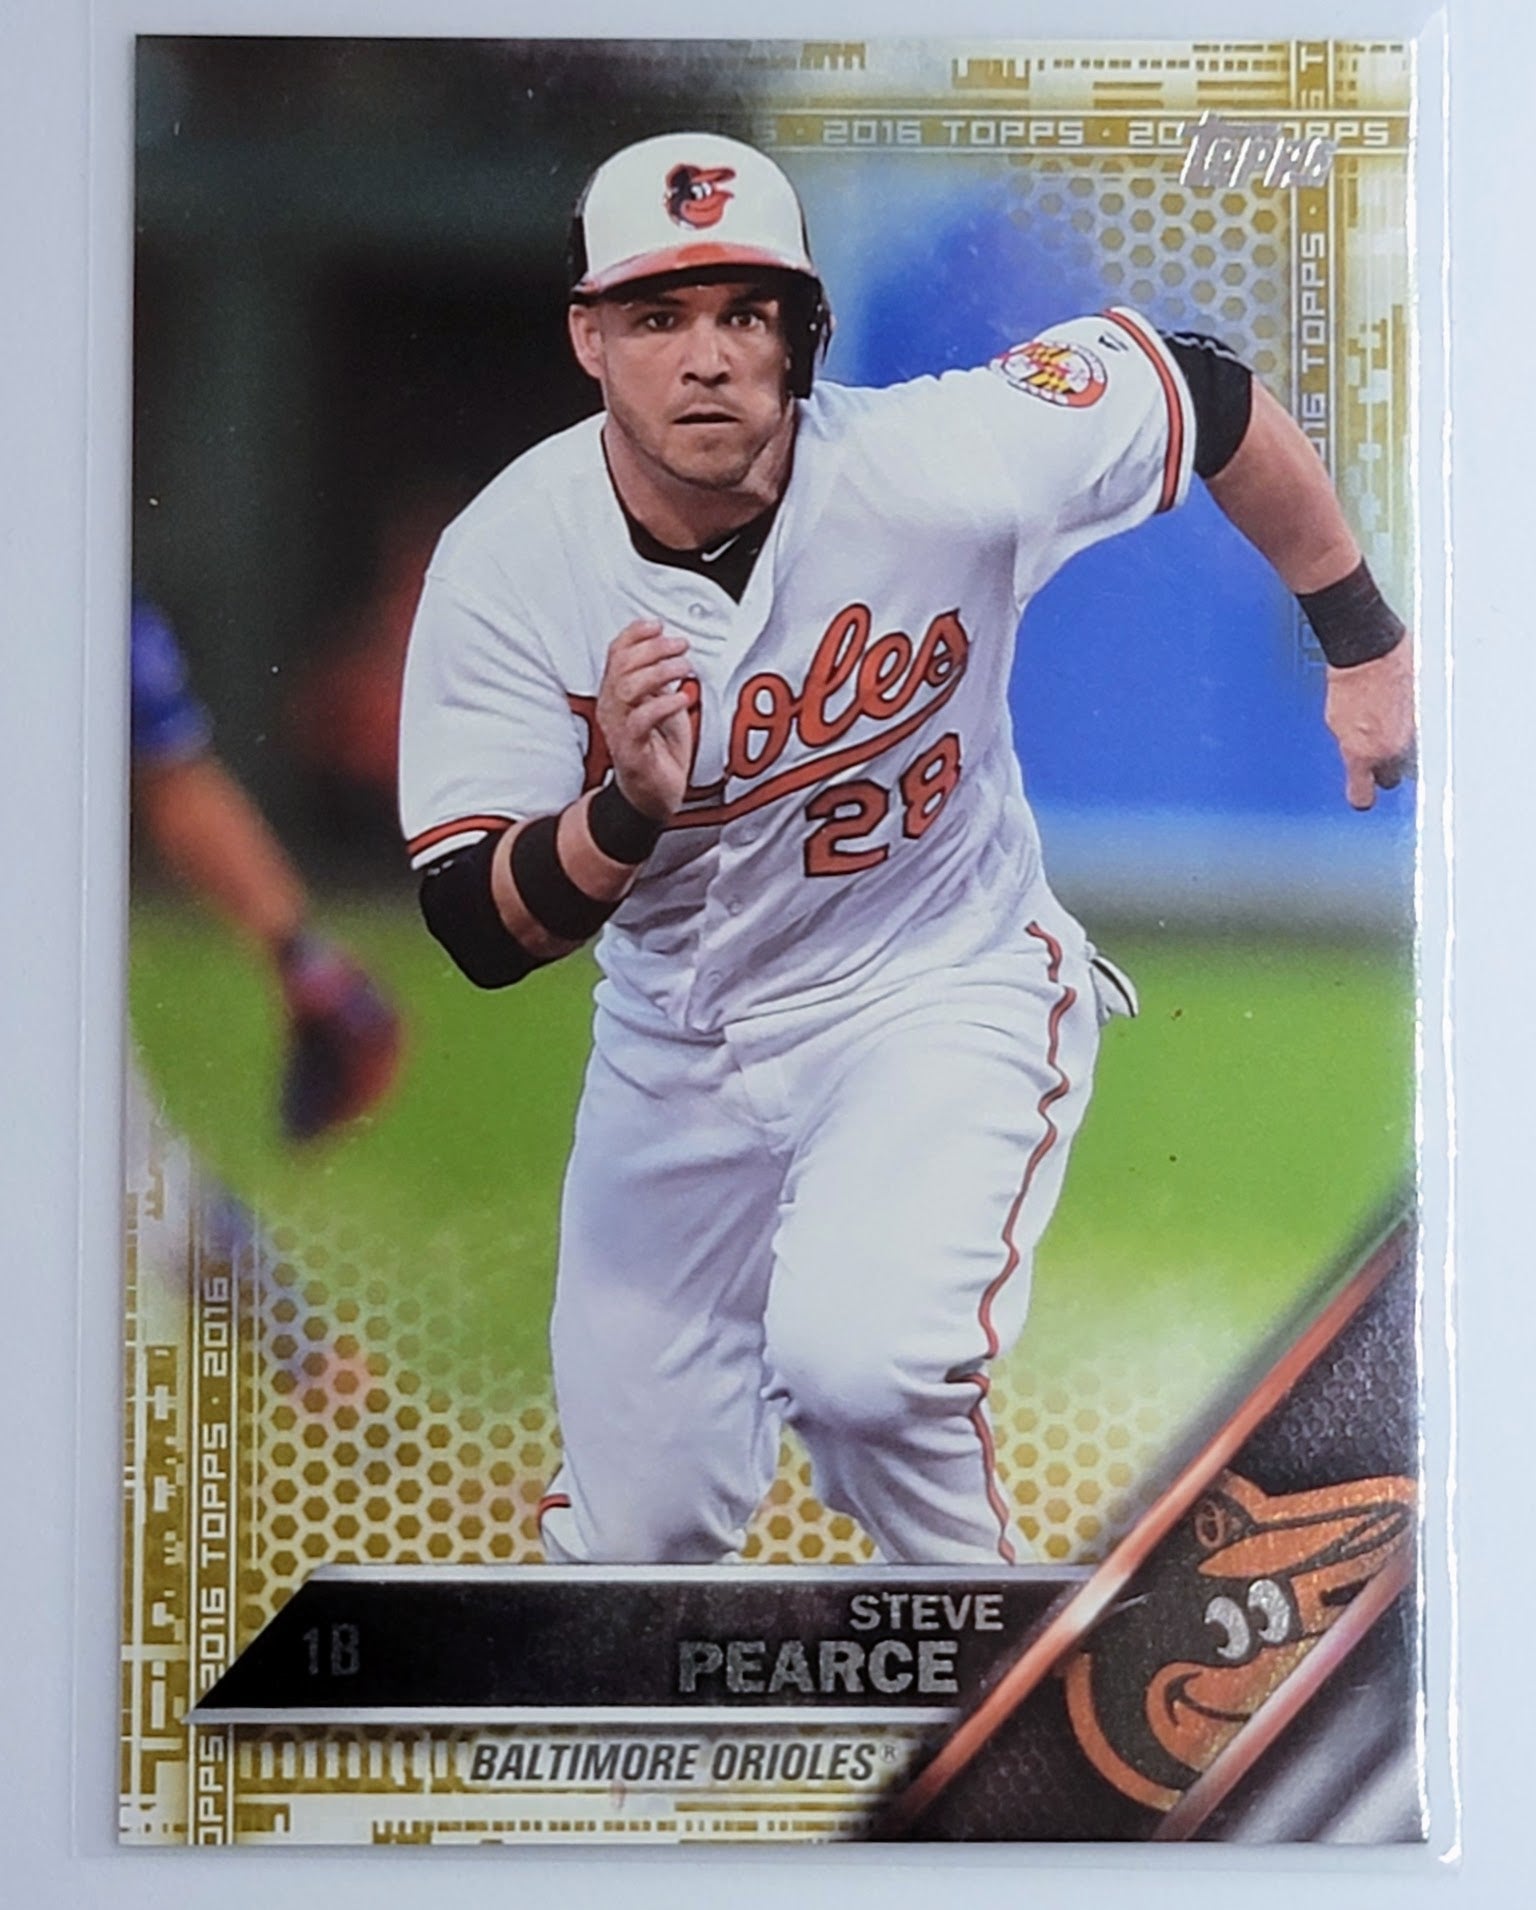 2016 Topps Update Steve Pearce
  Gold  SN2016 Baltimore Orioles Baseball
  Card  TH1CB simple Xclusive Collectibles   